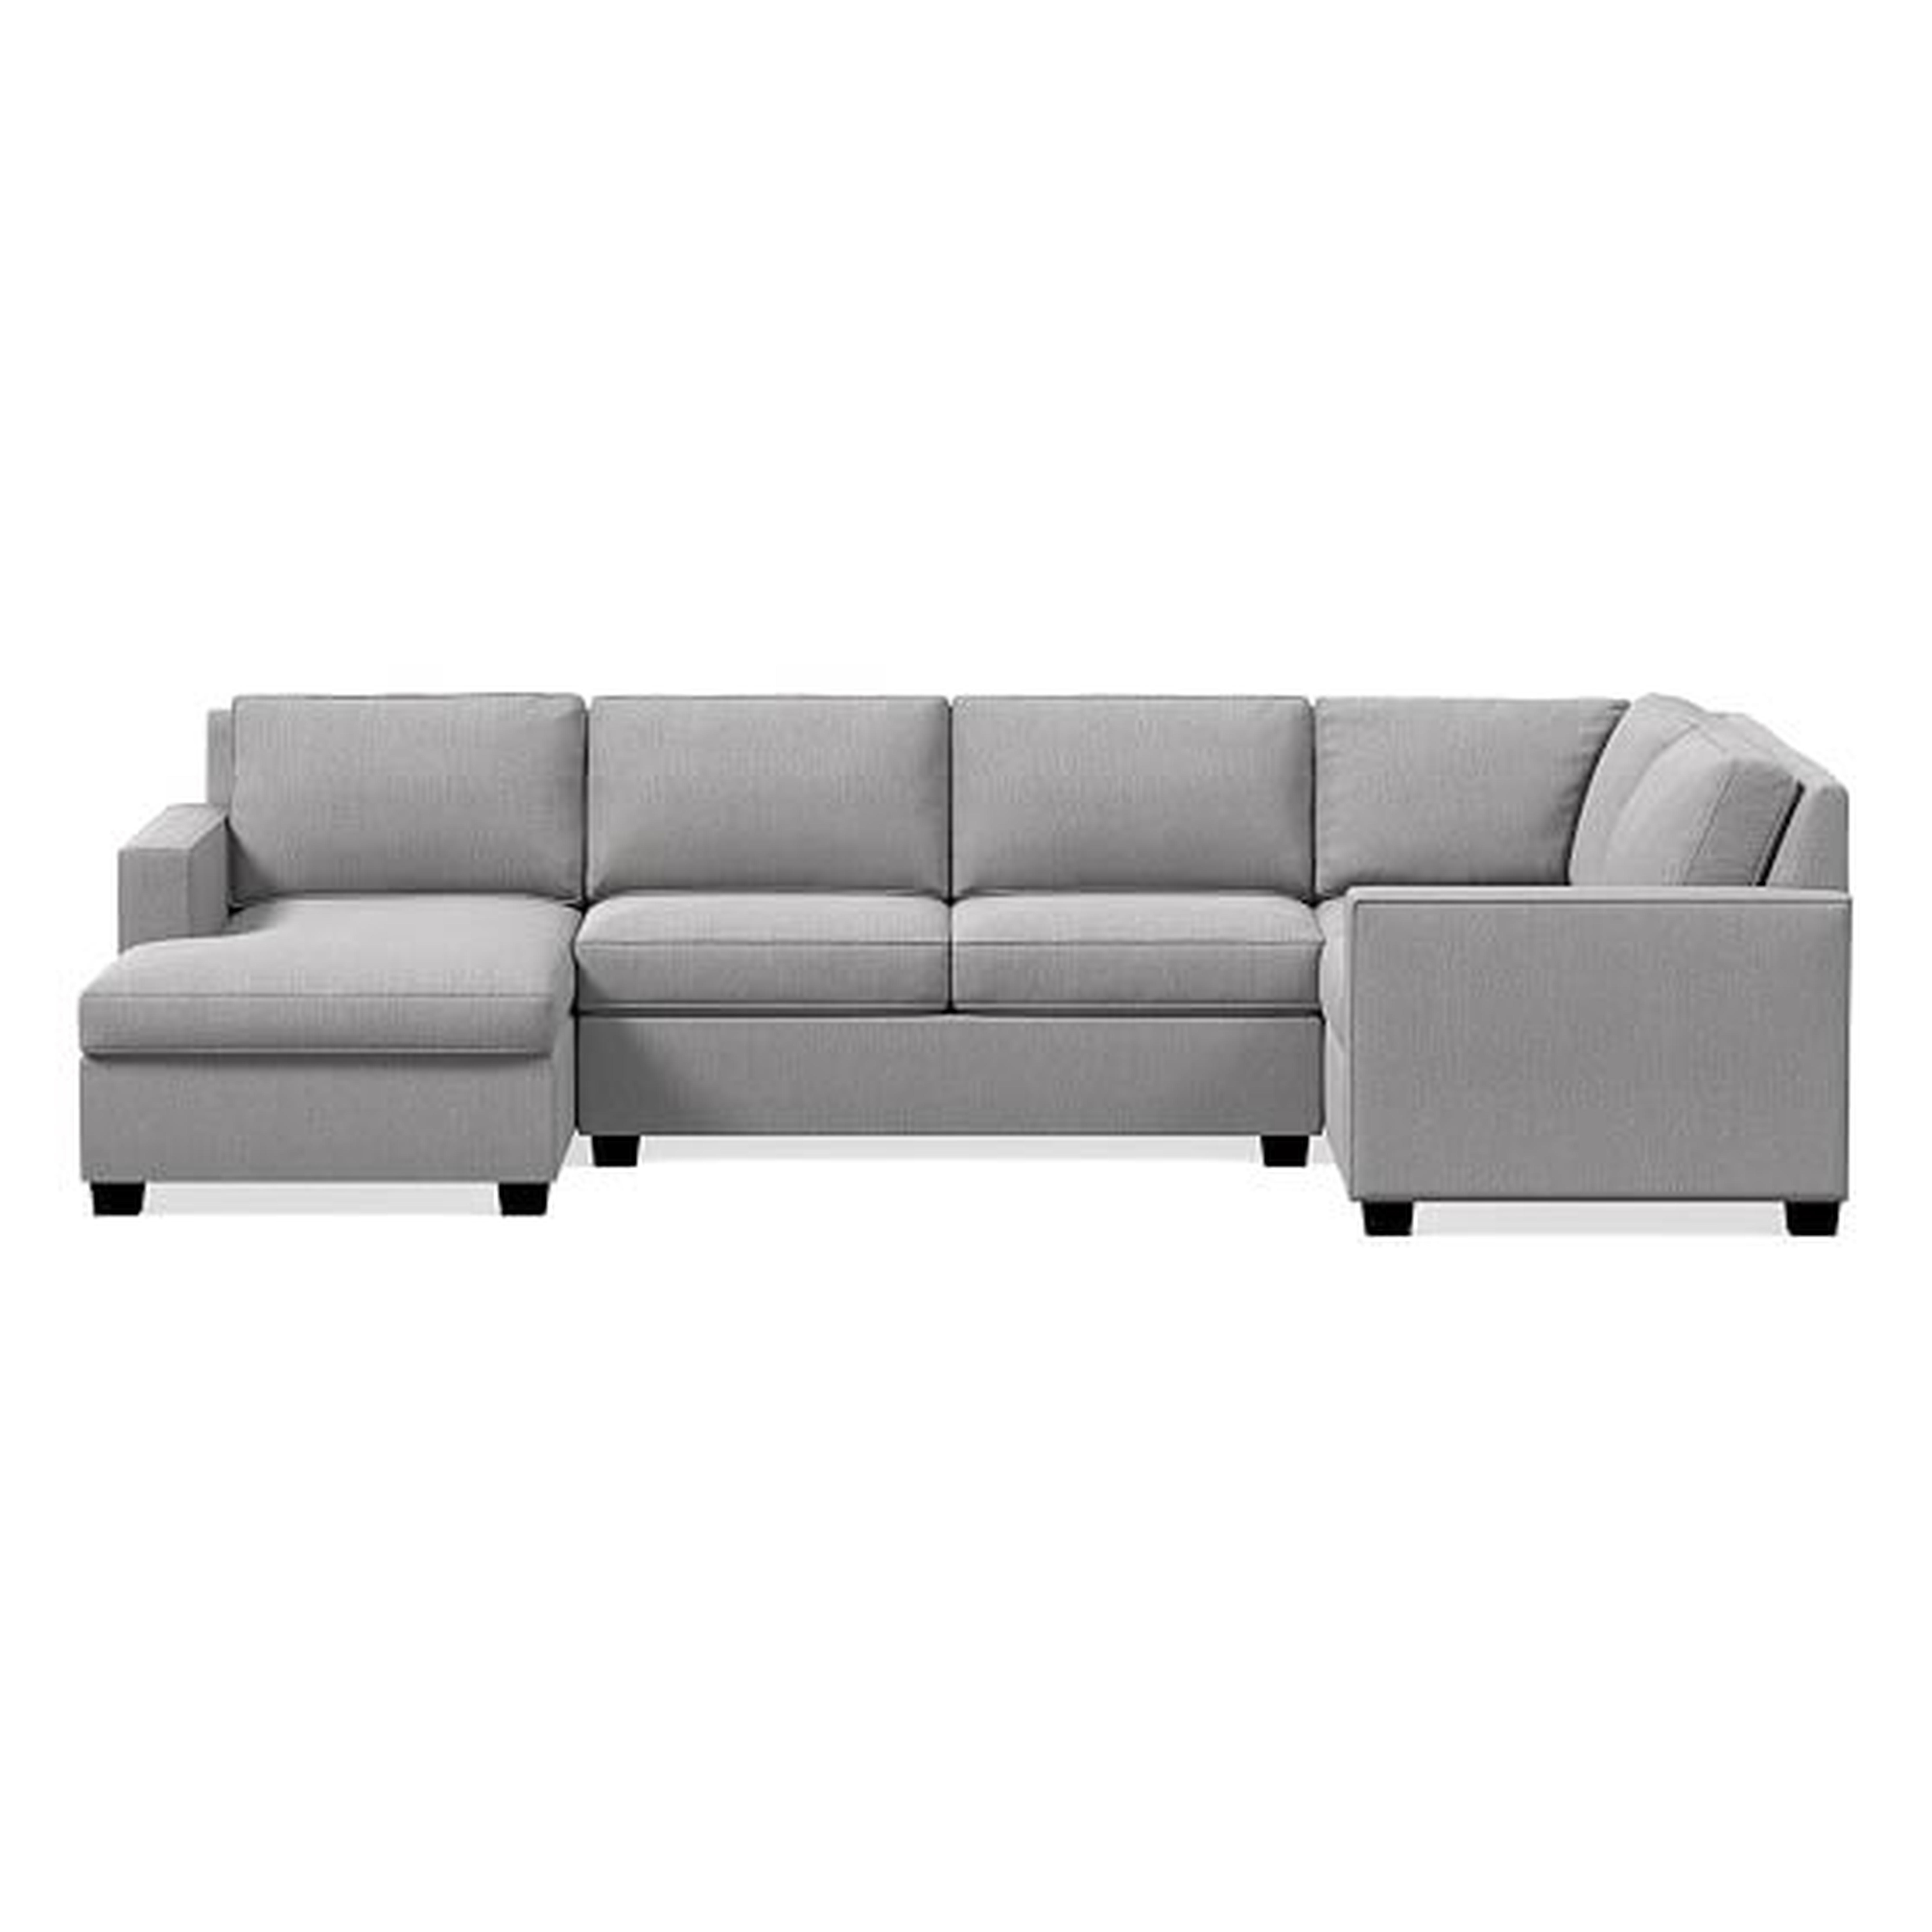 Henry Sectional Set 08: Armless Loveseat, Corner, Left Arm Chair, Right Arm Chaise, Poly, Sunbrella Performance Chenille, Fog, Chocolate - West Elm